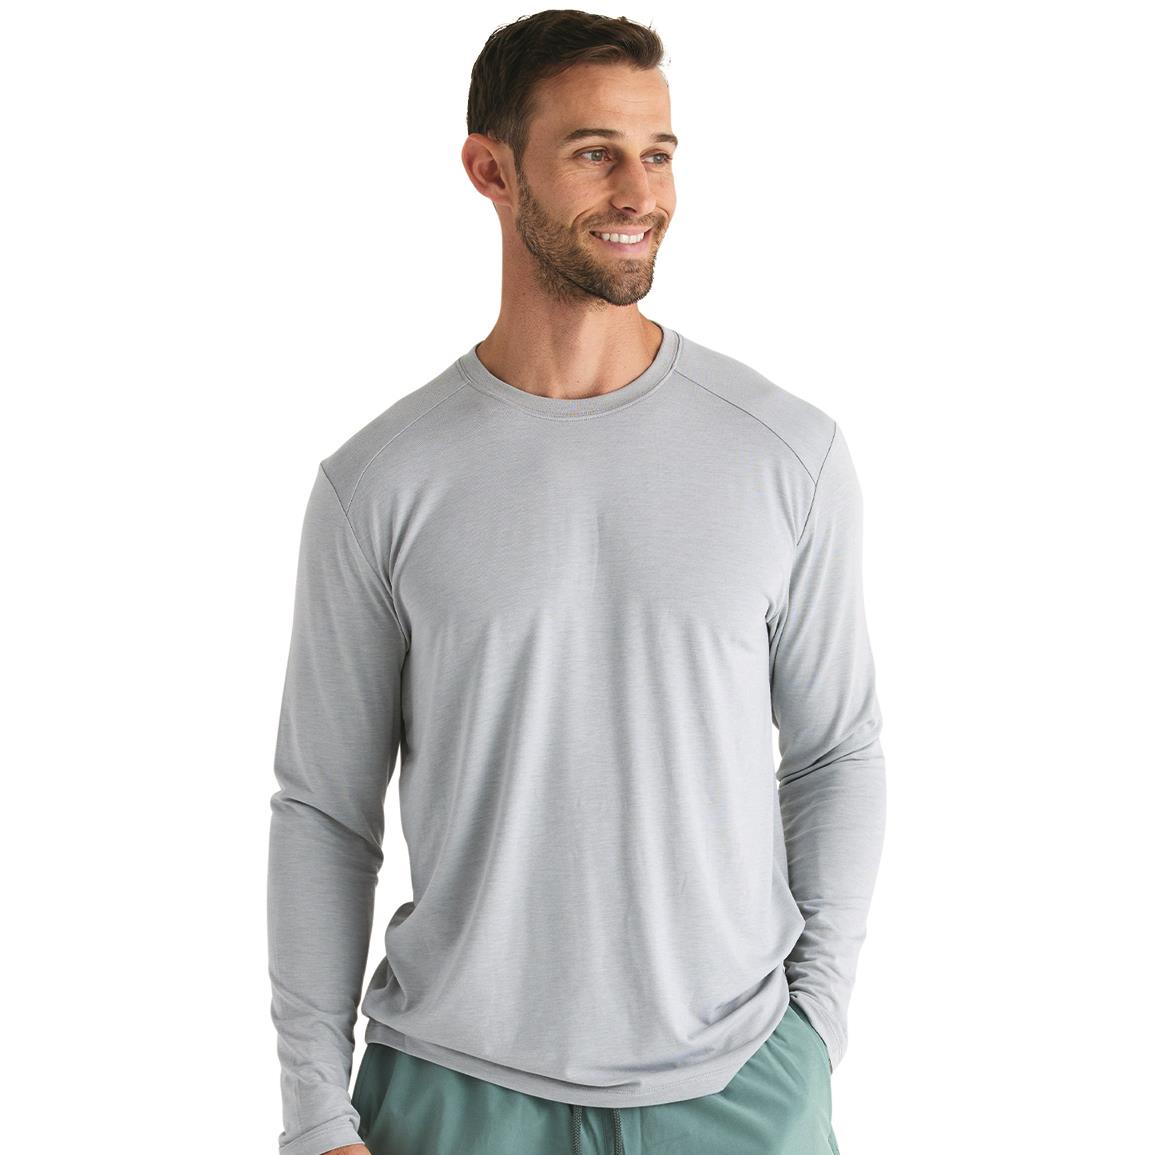 Huk Vented Pursuit Long Sleeve Tee - 730114, T-Shirts at Sportsman's Guide